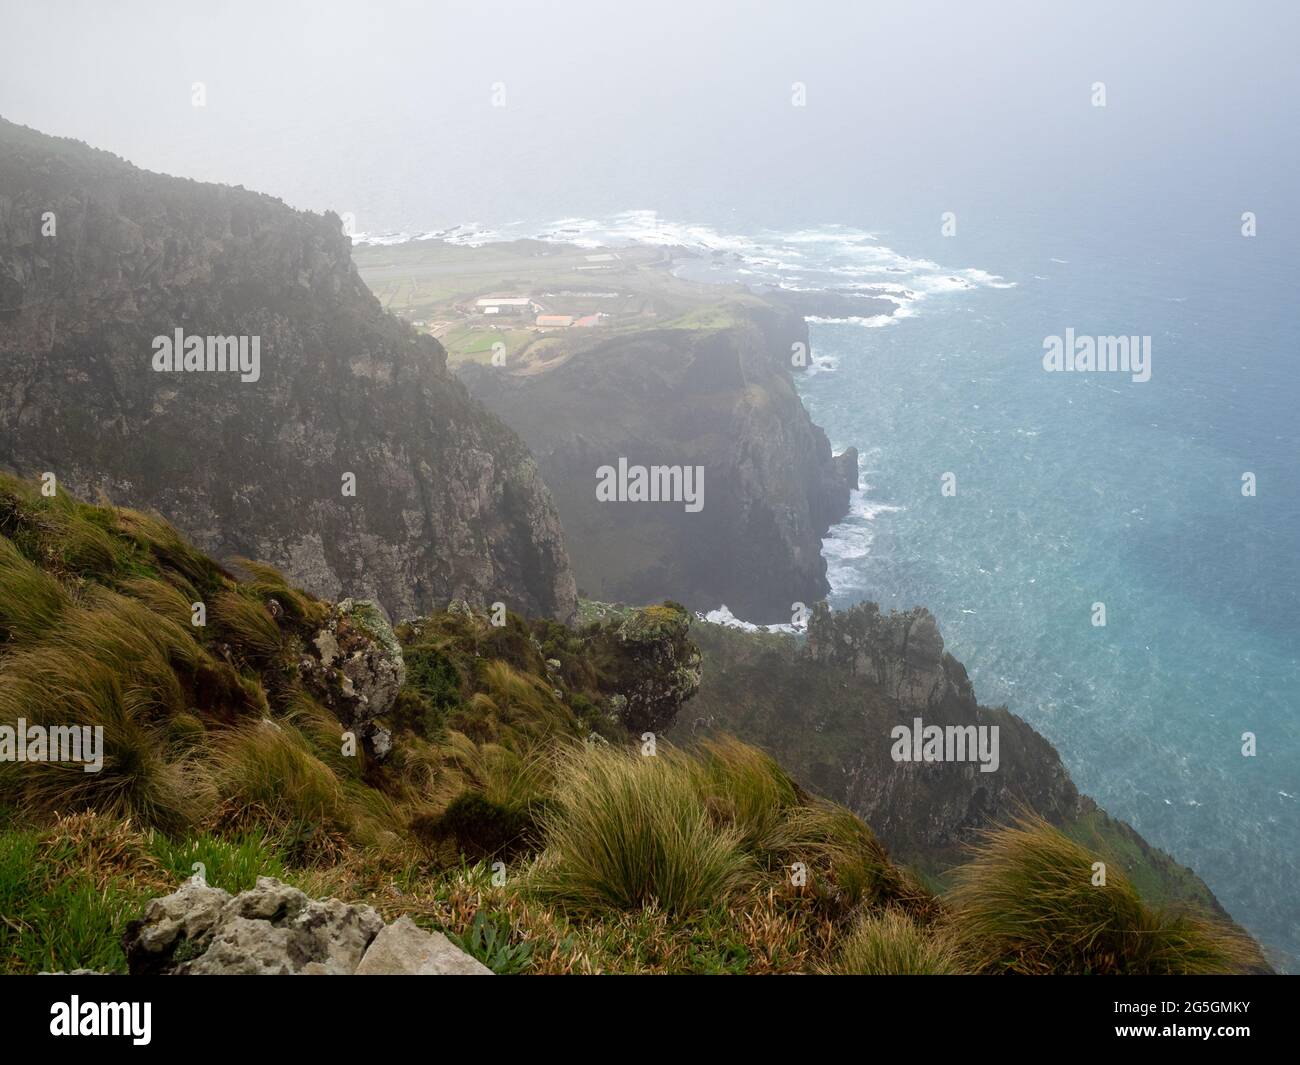 Looking from above the cliffs at the sea in Corvo Island, Azores Stock Photo